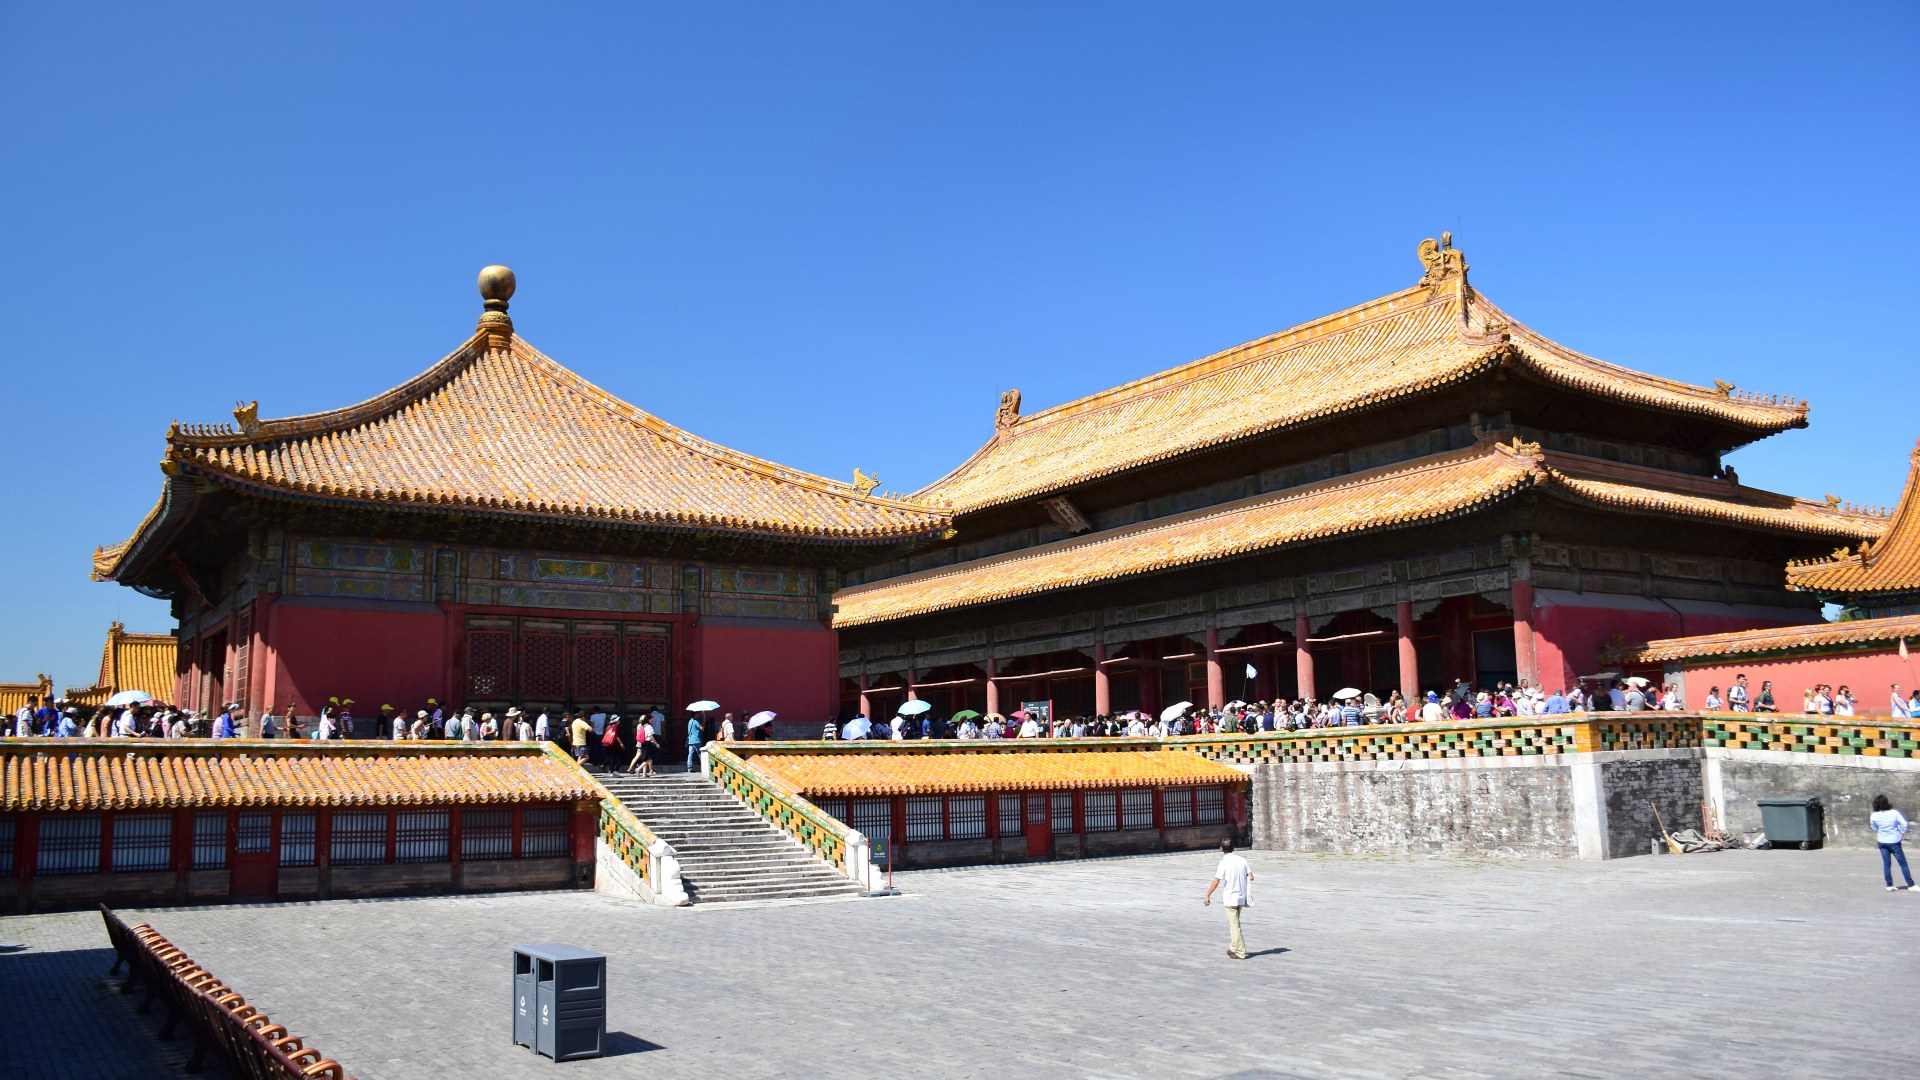 Hall of Union and Palace of Earthly Tranquility, Forbidden City, Beijing